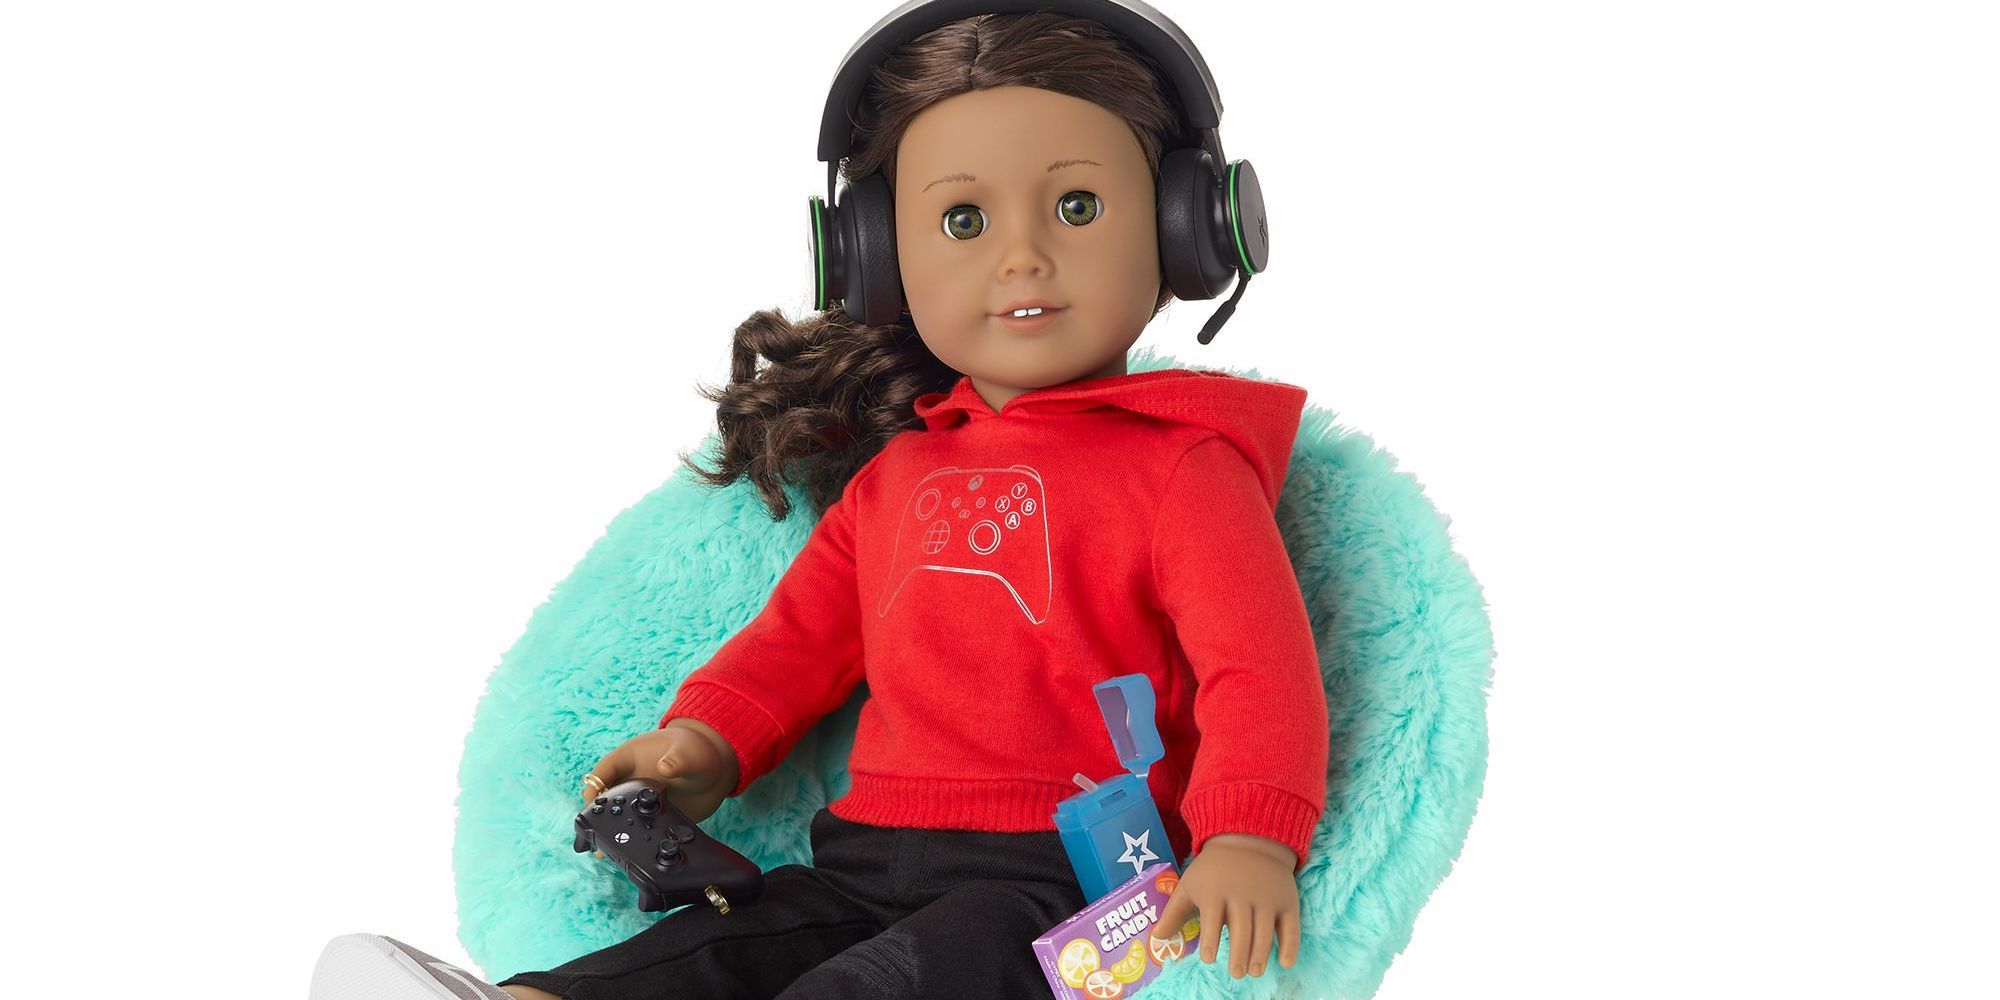 American Girl doll set includes Xbox accessories